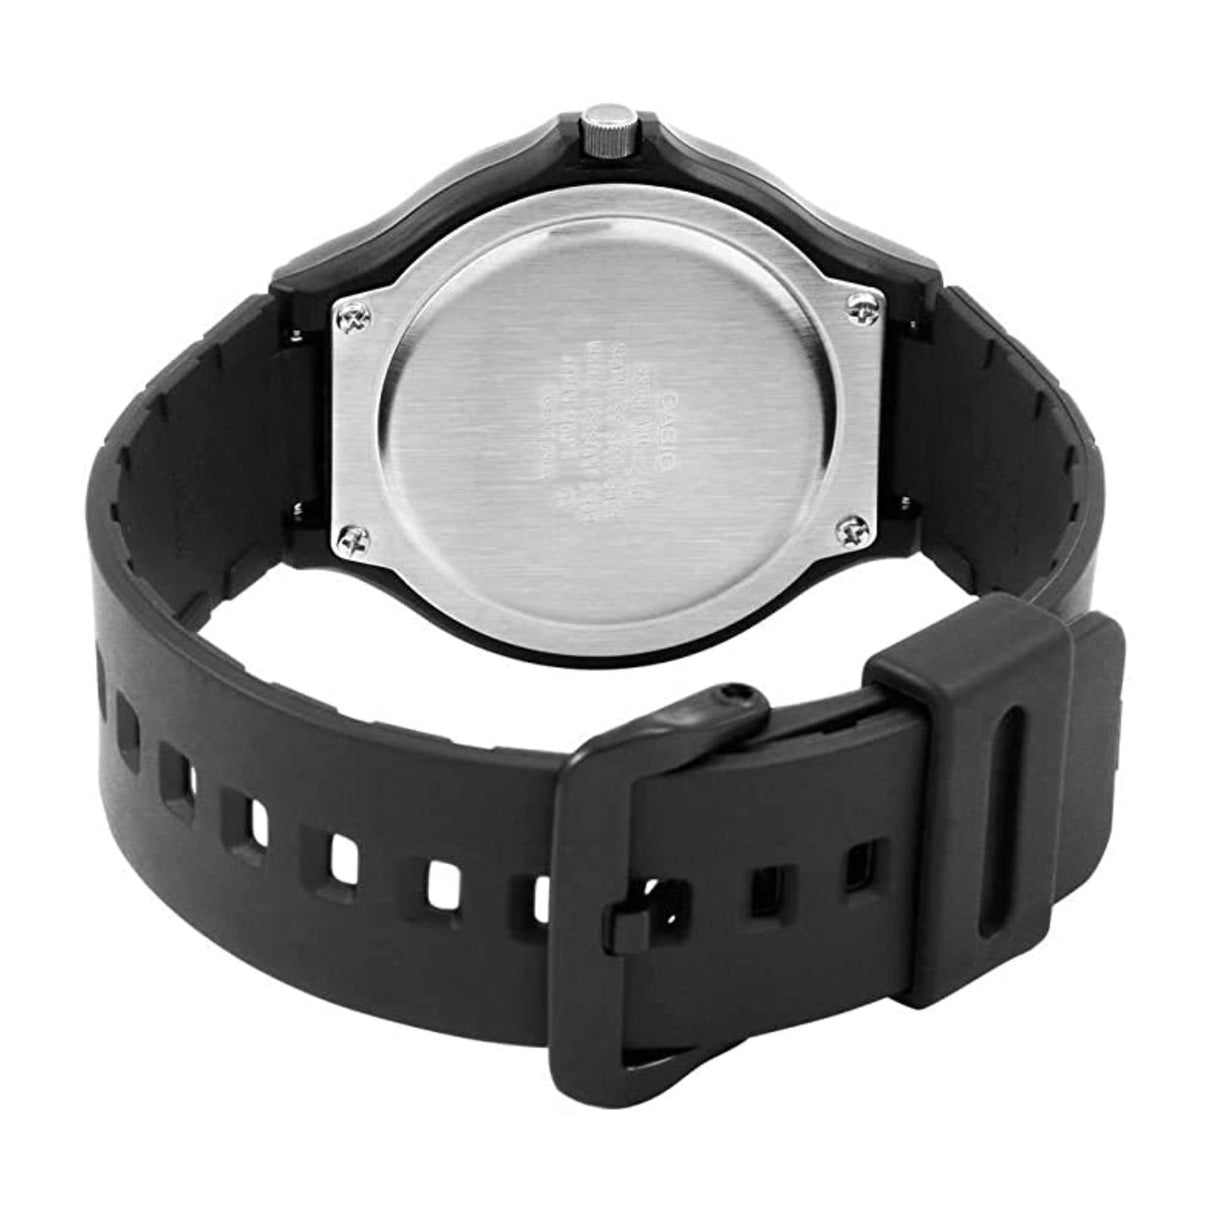 Mens Analogue Watch with Resin Strap - Black - PROTEUS MARINE STORE